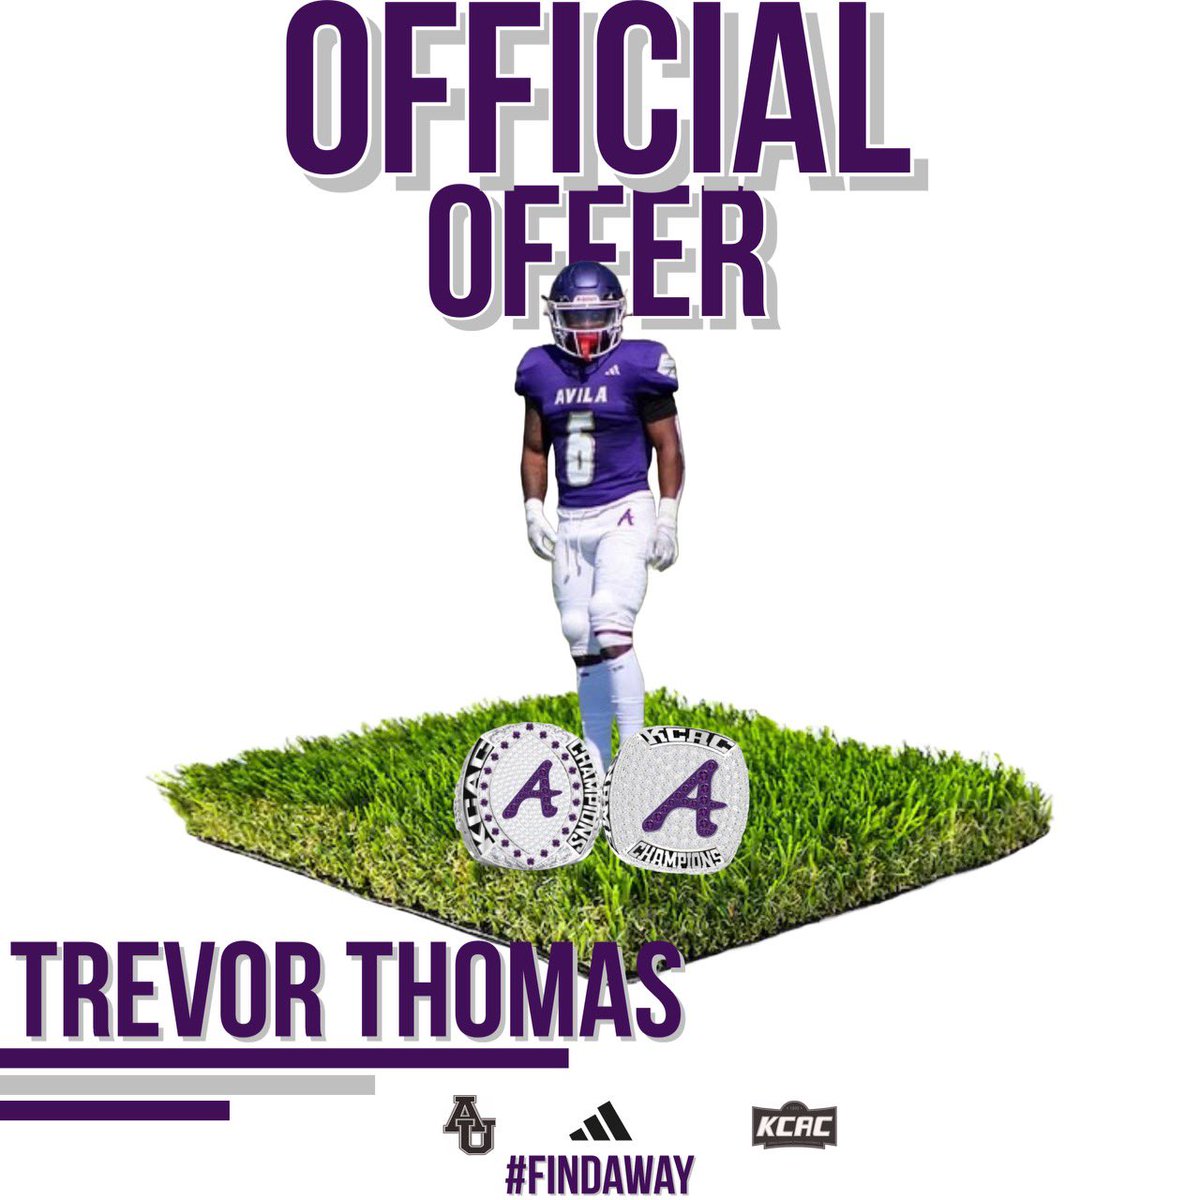 All Glory to God! After talking with @TheCoachCoty I am blessed to receive an offer from Avila University!